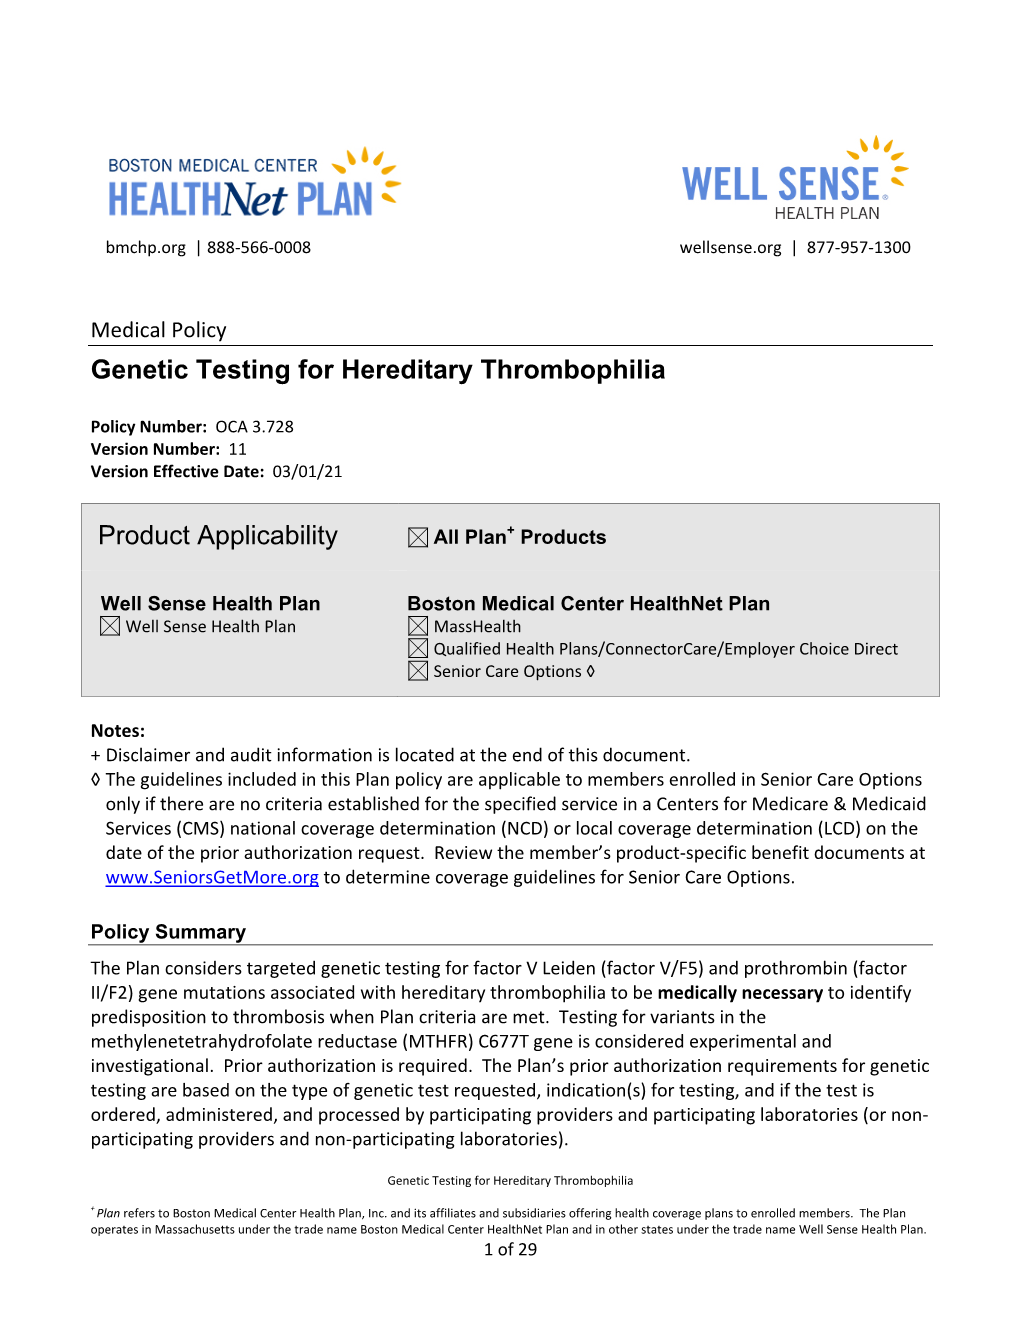 Genetic Testing for Hereditary Thrombophilia Product Applicability